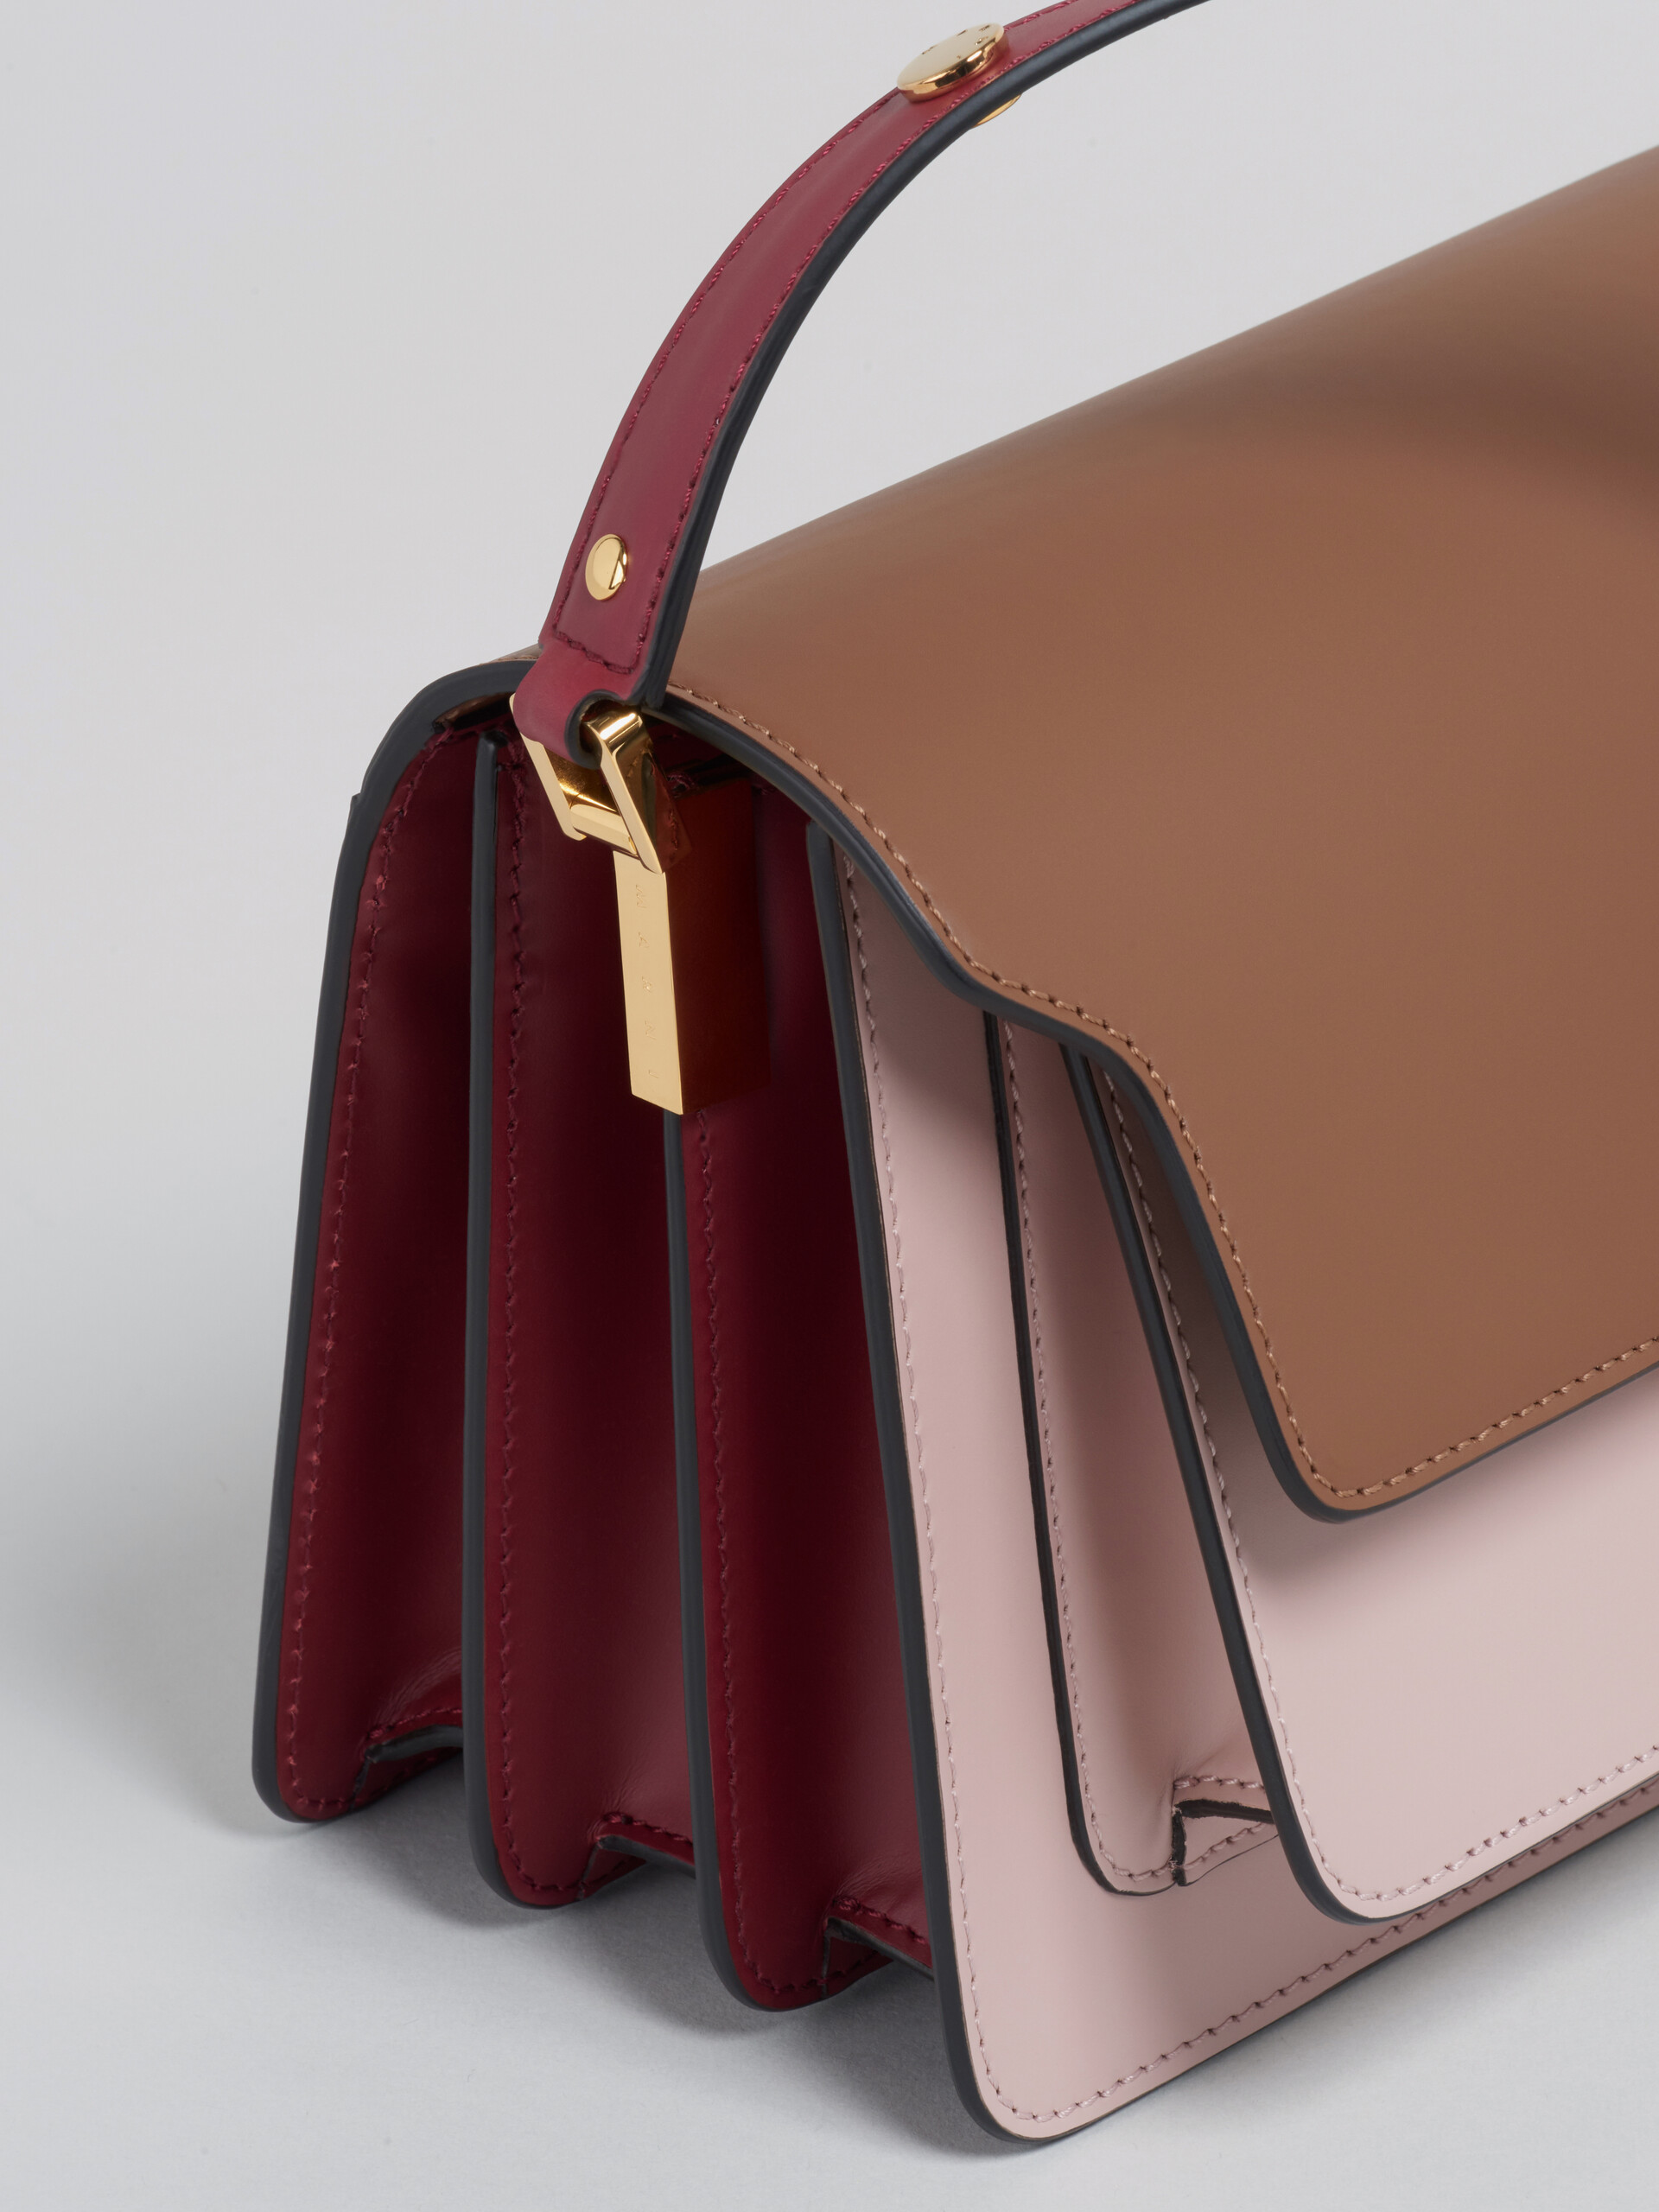 TRUNK medium bag in brown pink and red leather - Shoulder Bags - Image 4